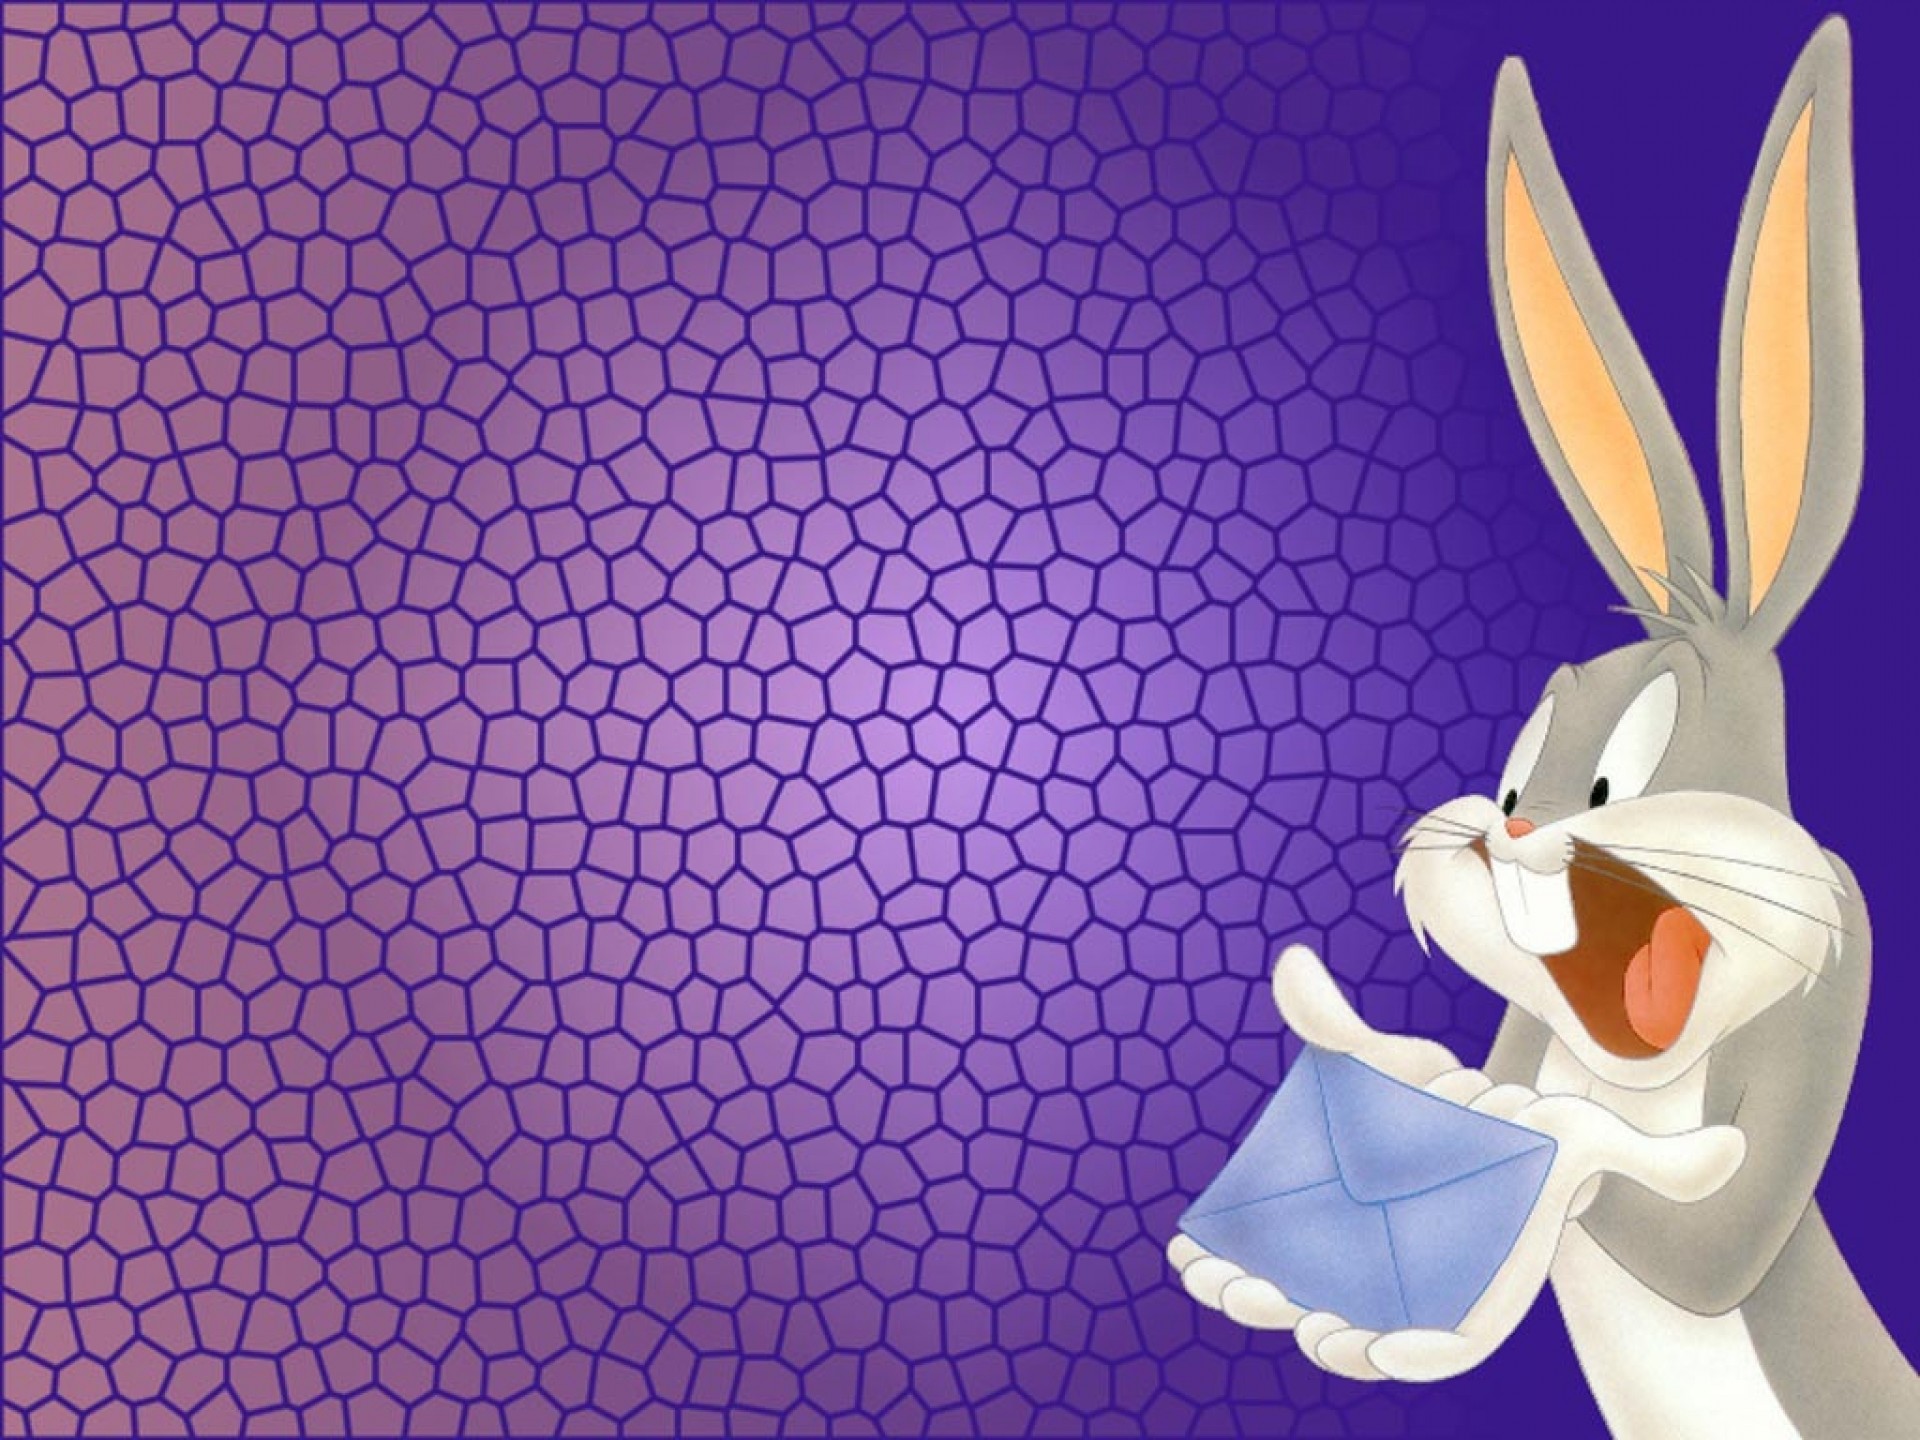 1920x1440 Bugs bunny wallpaper for iphone - photo#24